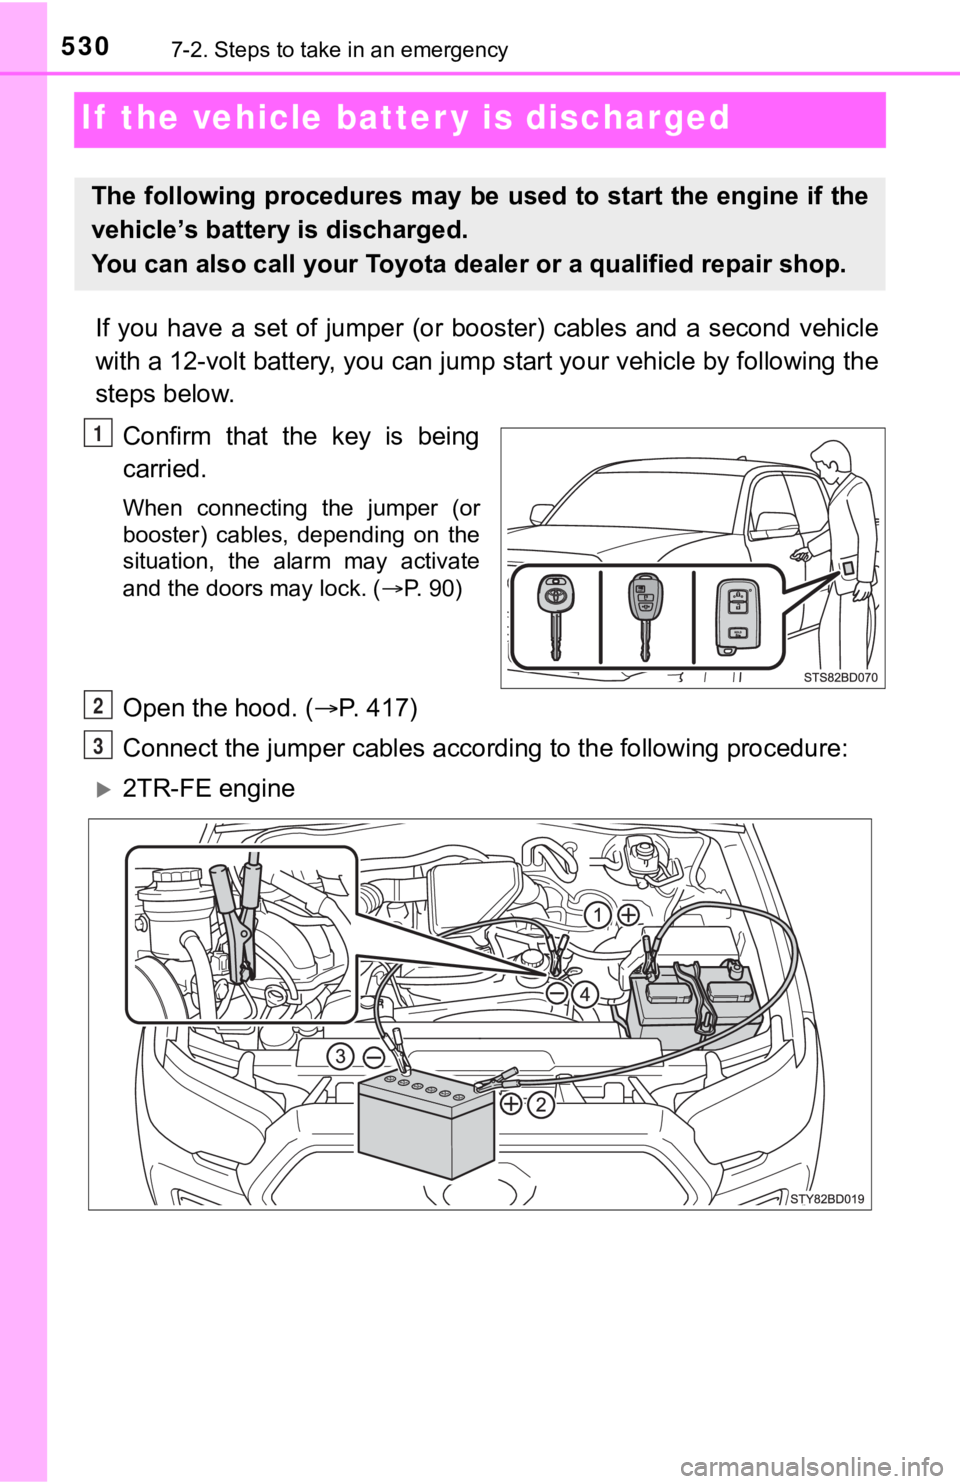 TOYOTA TUNDRA 2022  Owners Manual 5307-2. Steps to take in an emergency
If  the vehicle batter y is discharged
If  you  have  a  set  of  jumper  (or  booster)  cables  and  a  second  ve hicle
with a 12-volt battery, you can jump sta